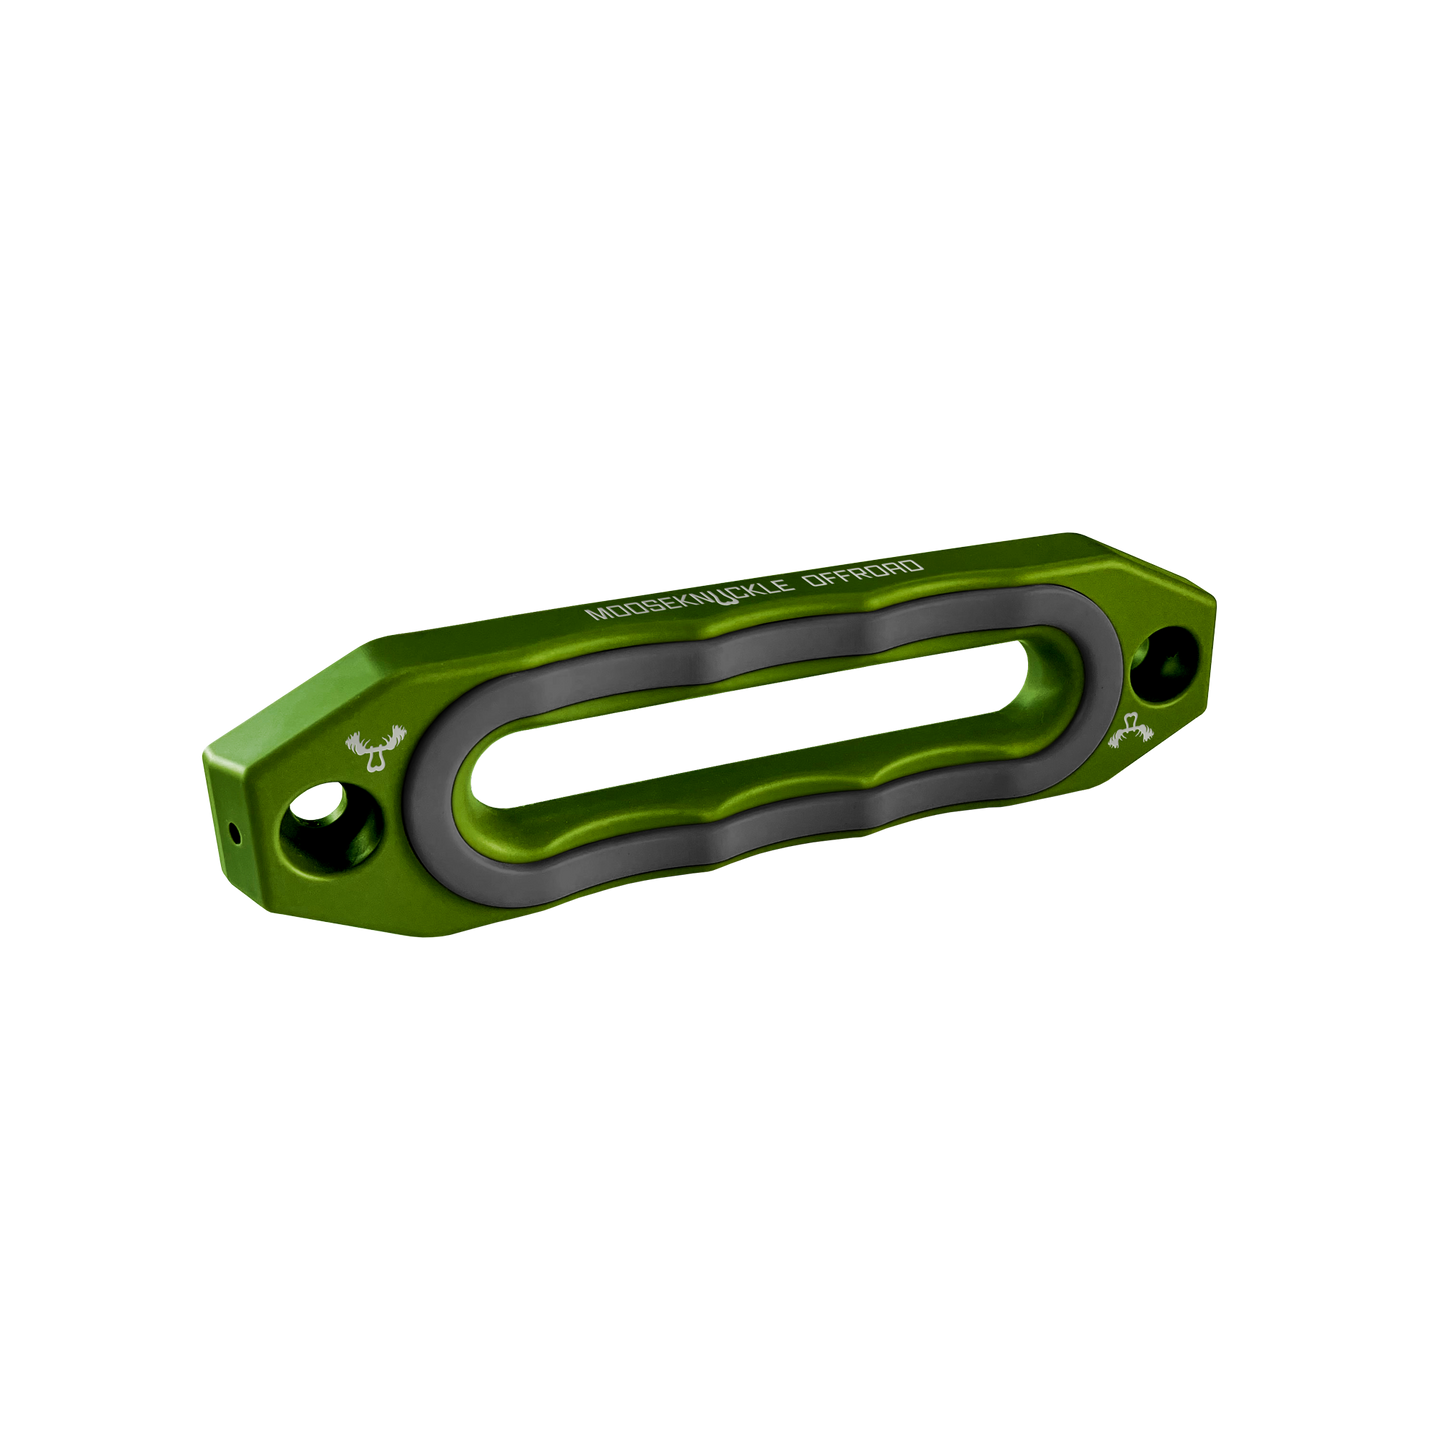 Jawse Fairlead Front Body Only in Bean Green and Gun Gray